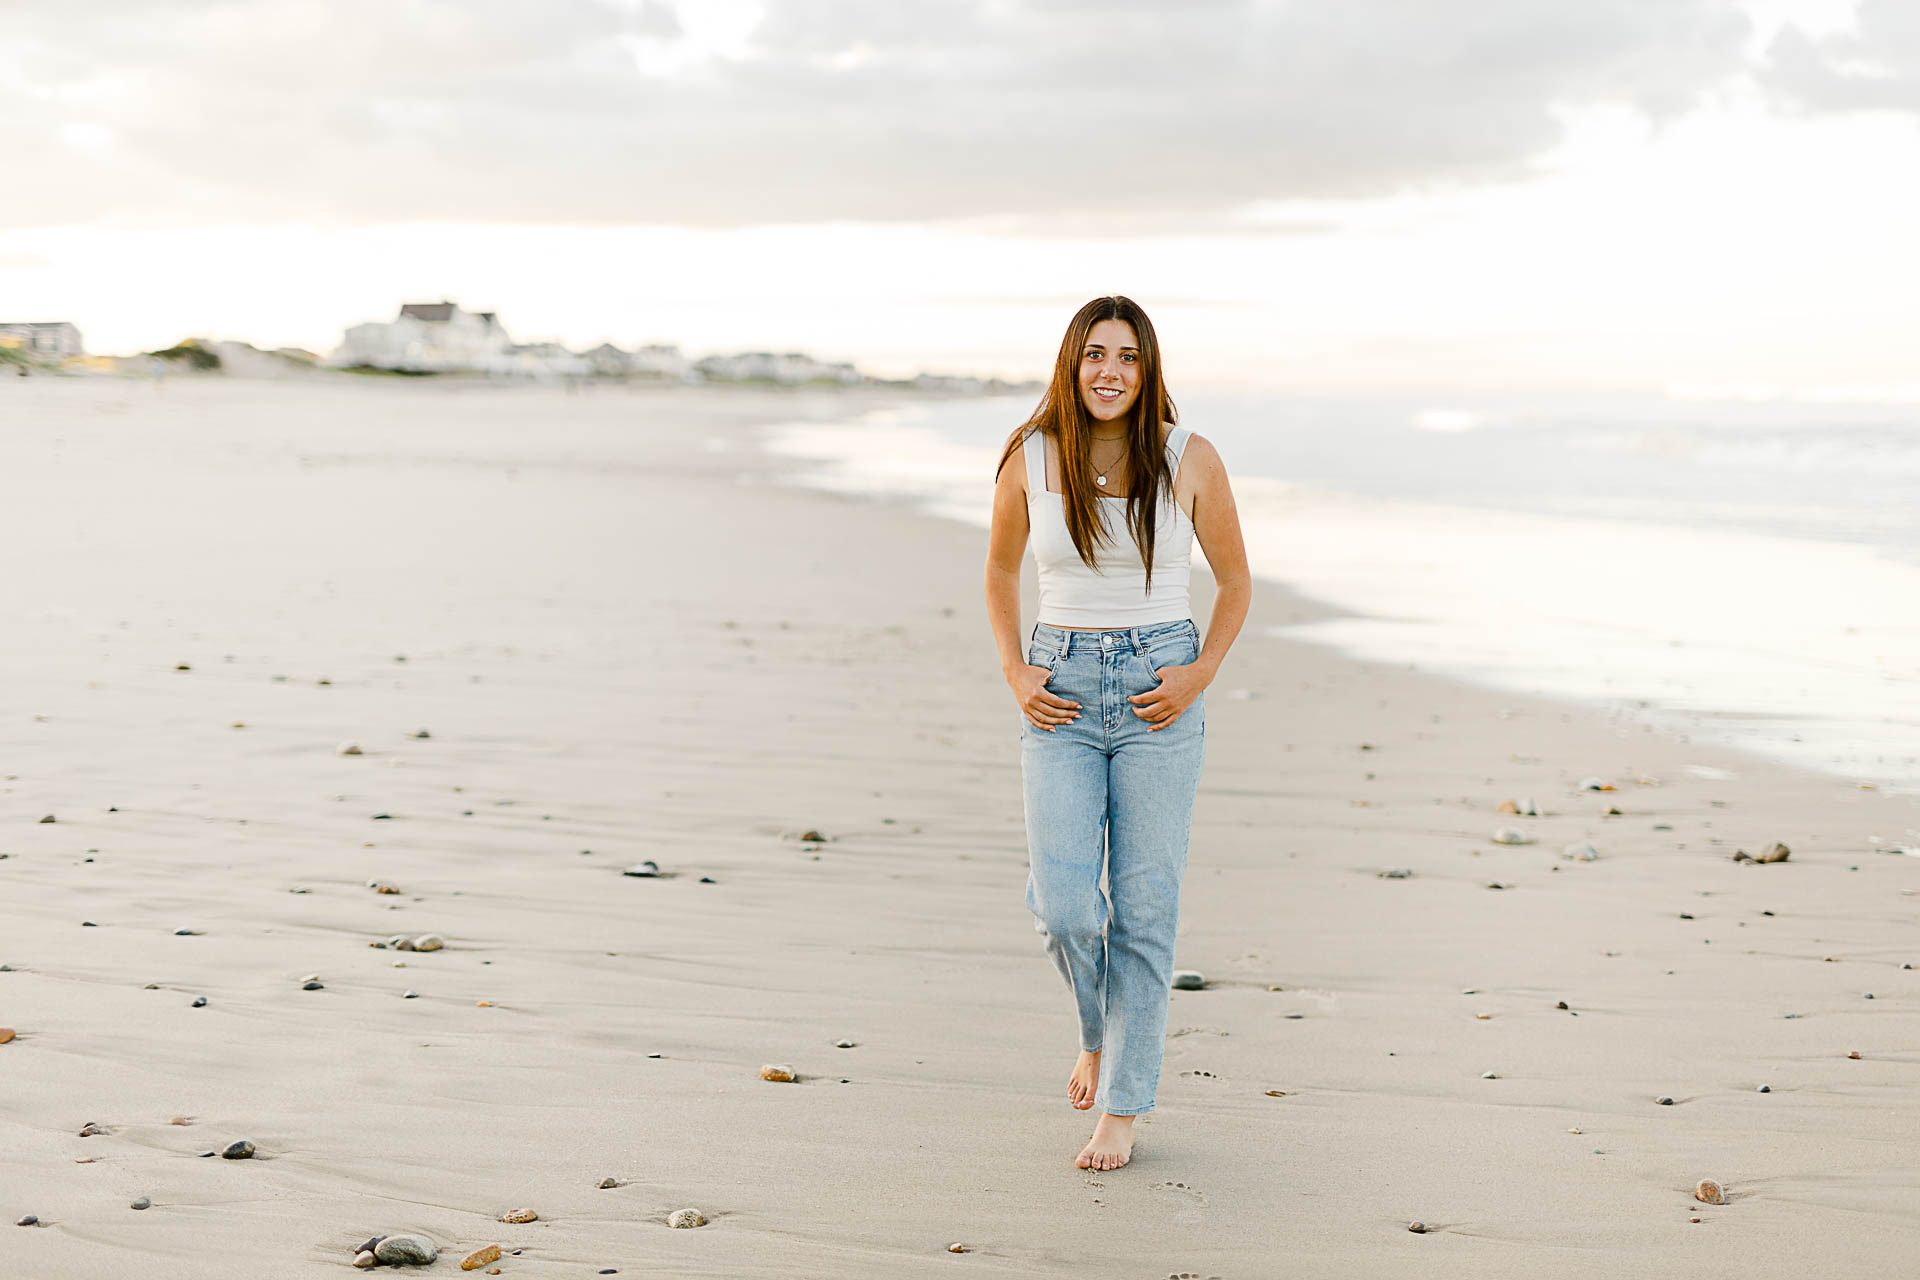 Photo by Norwell Senior Portrait Photographer Christina Runnals | High school girl walking on the beach and laughing